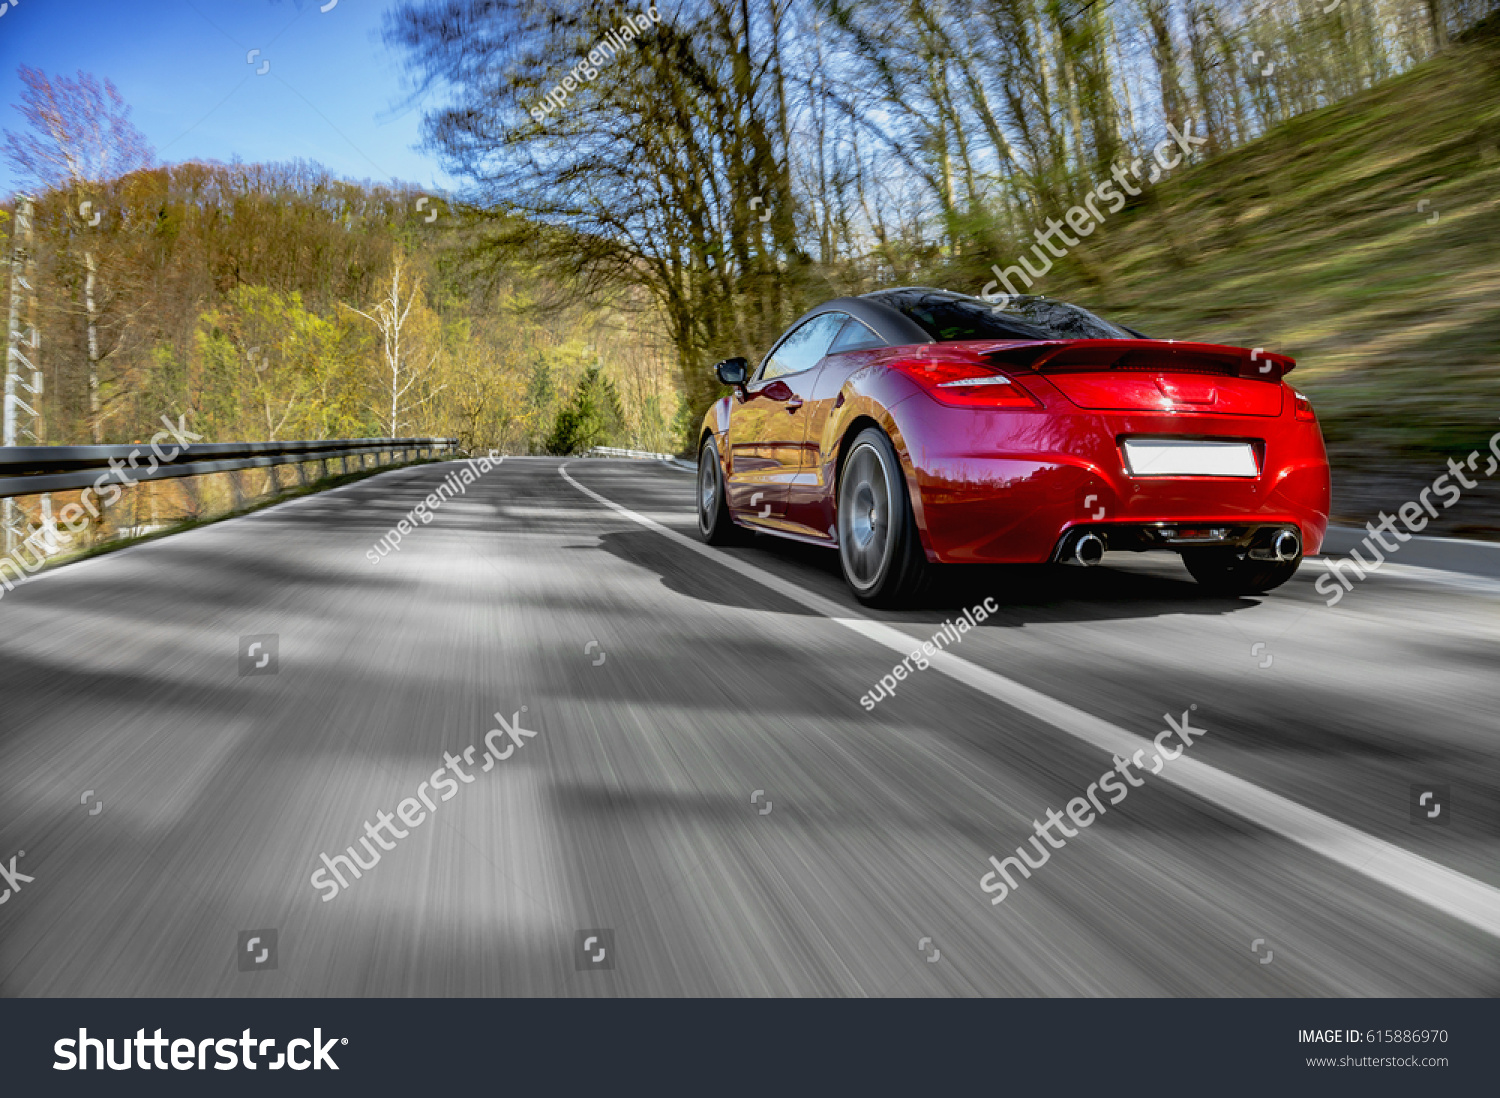 Generic red sports car driving fast on the open road #615886970